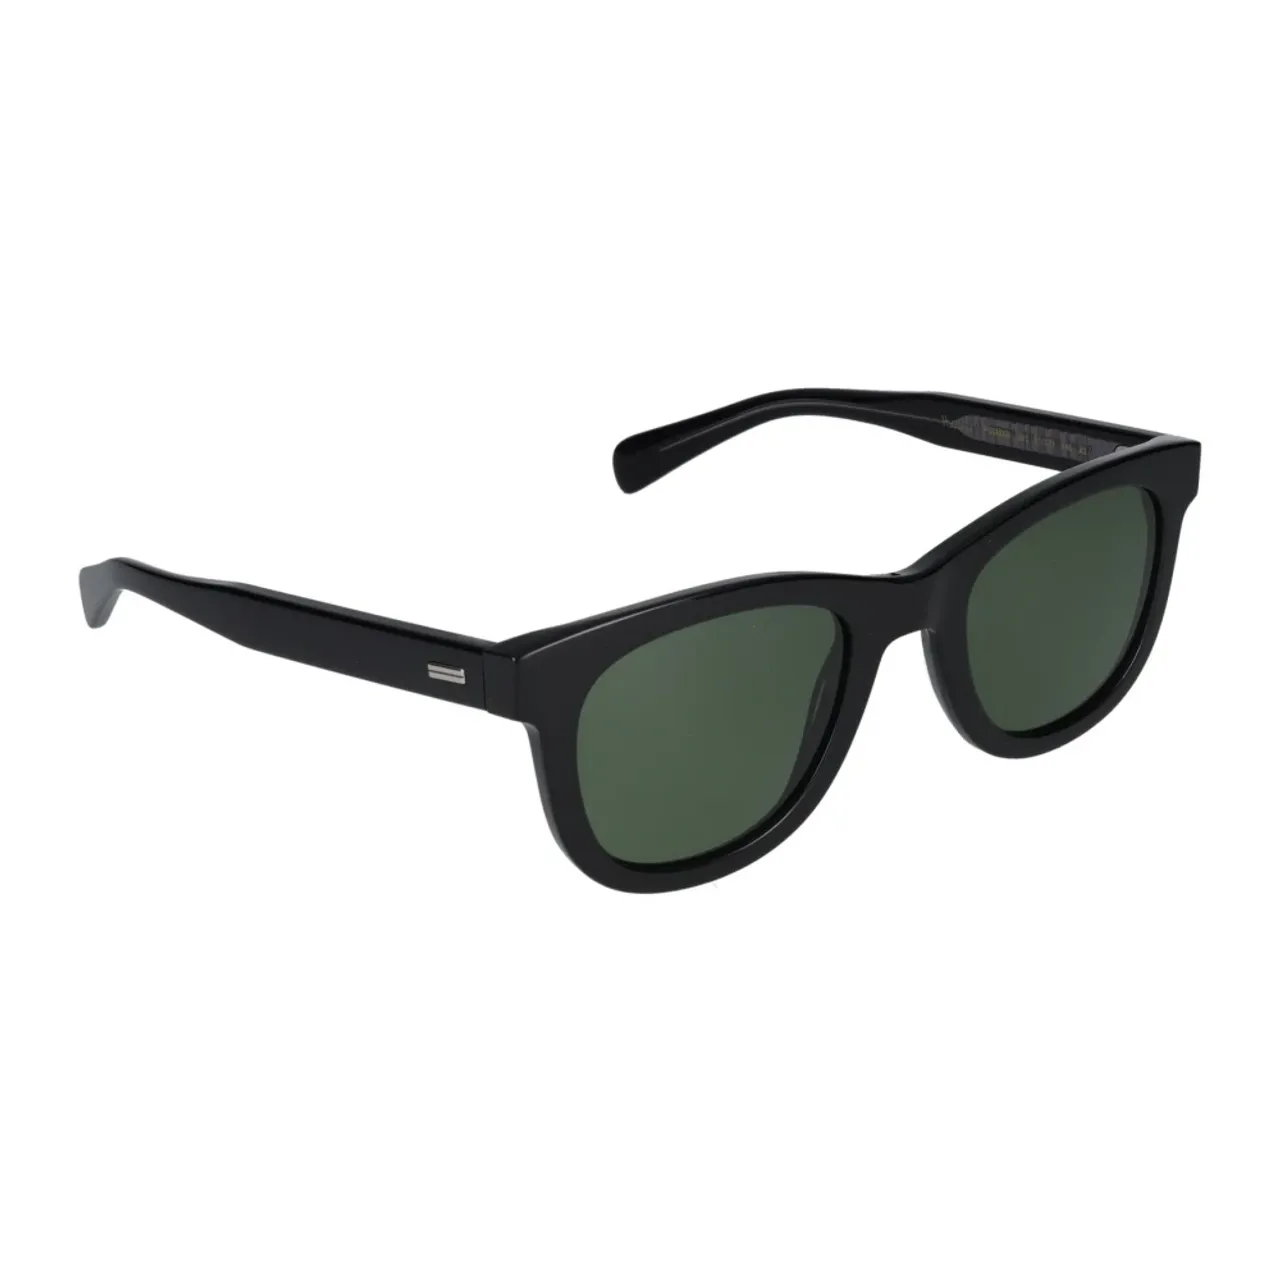 Paul Smith Sonnenbrille HALONS,Sunglasses PS By Paul Smith